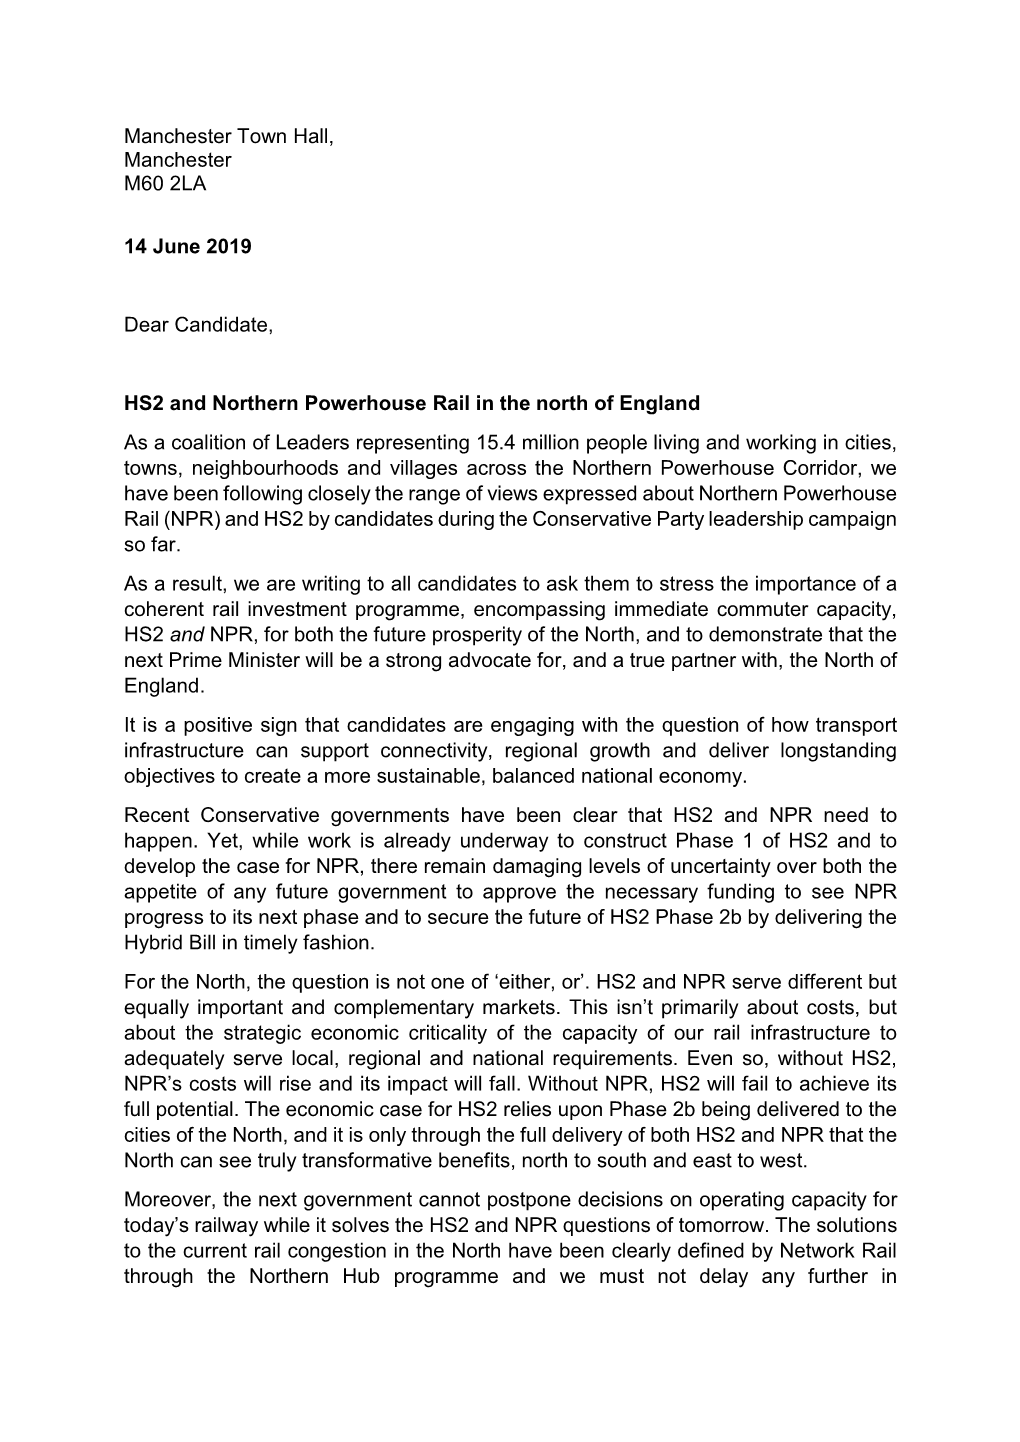 Manchester Town Hall, Manchester M60 2LA 14 June 2019 Dear Candidate, HS2 and Northern Powerhouse Rail in the North of England